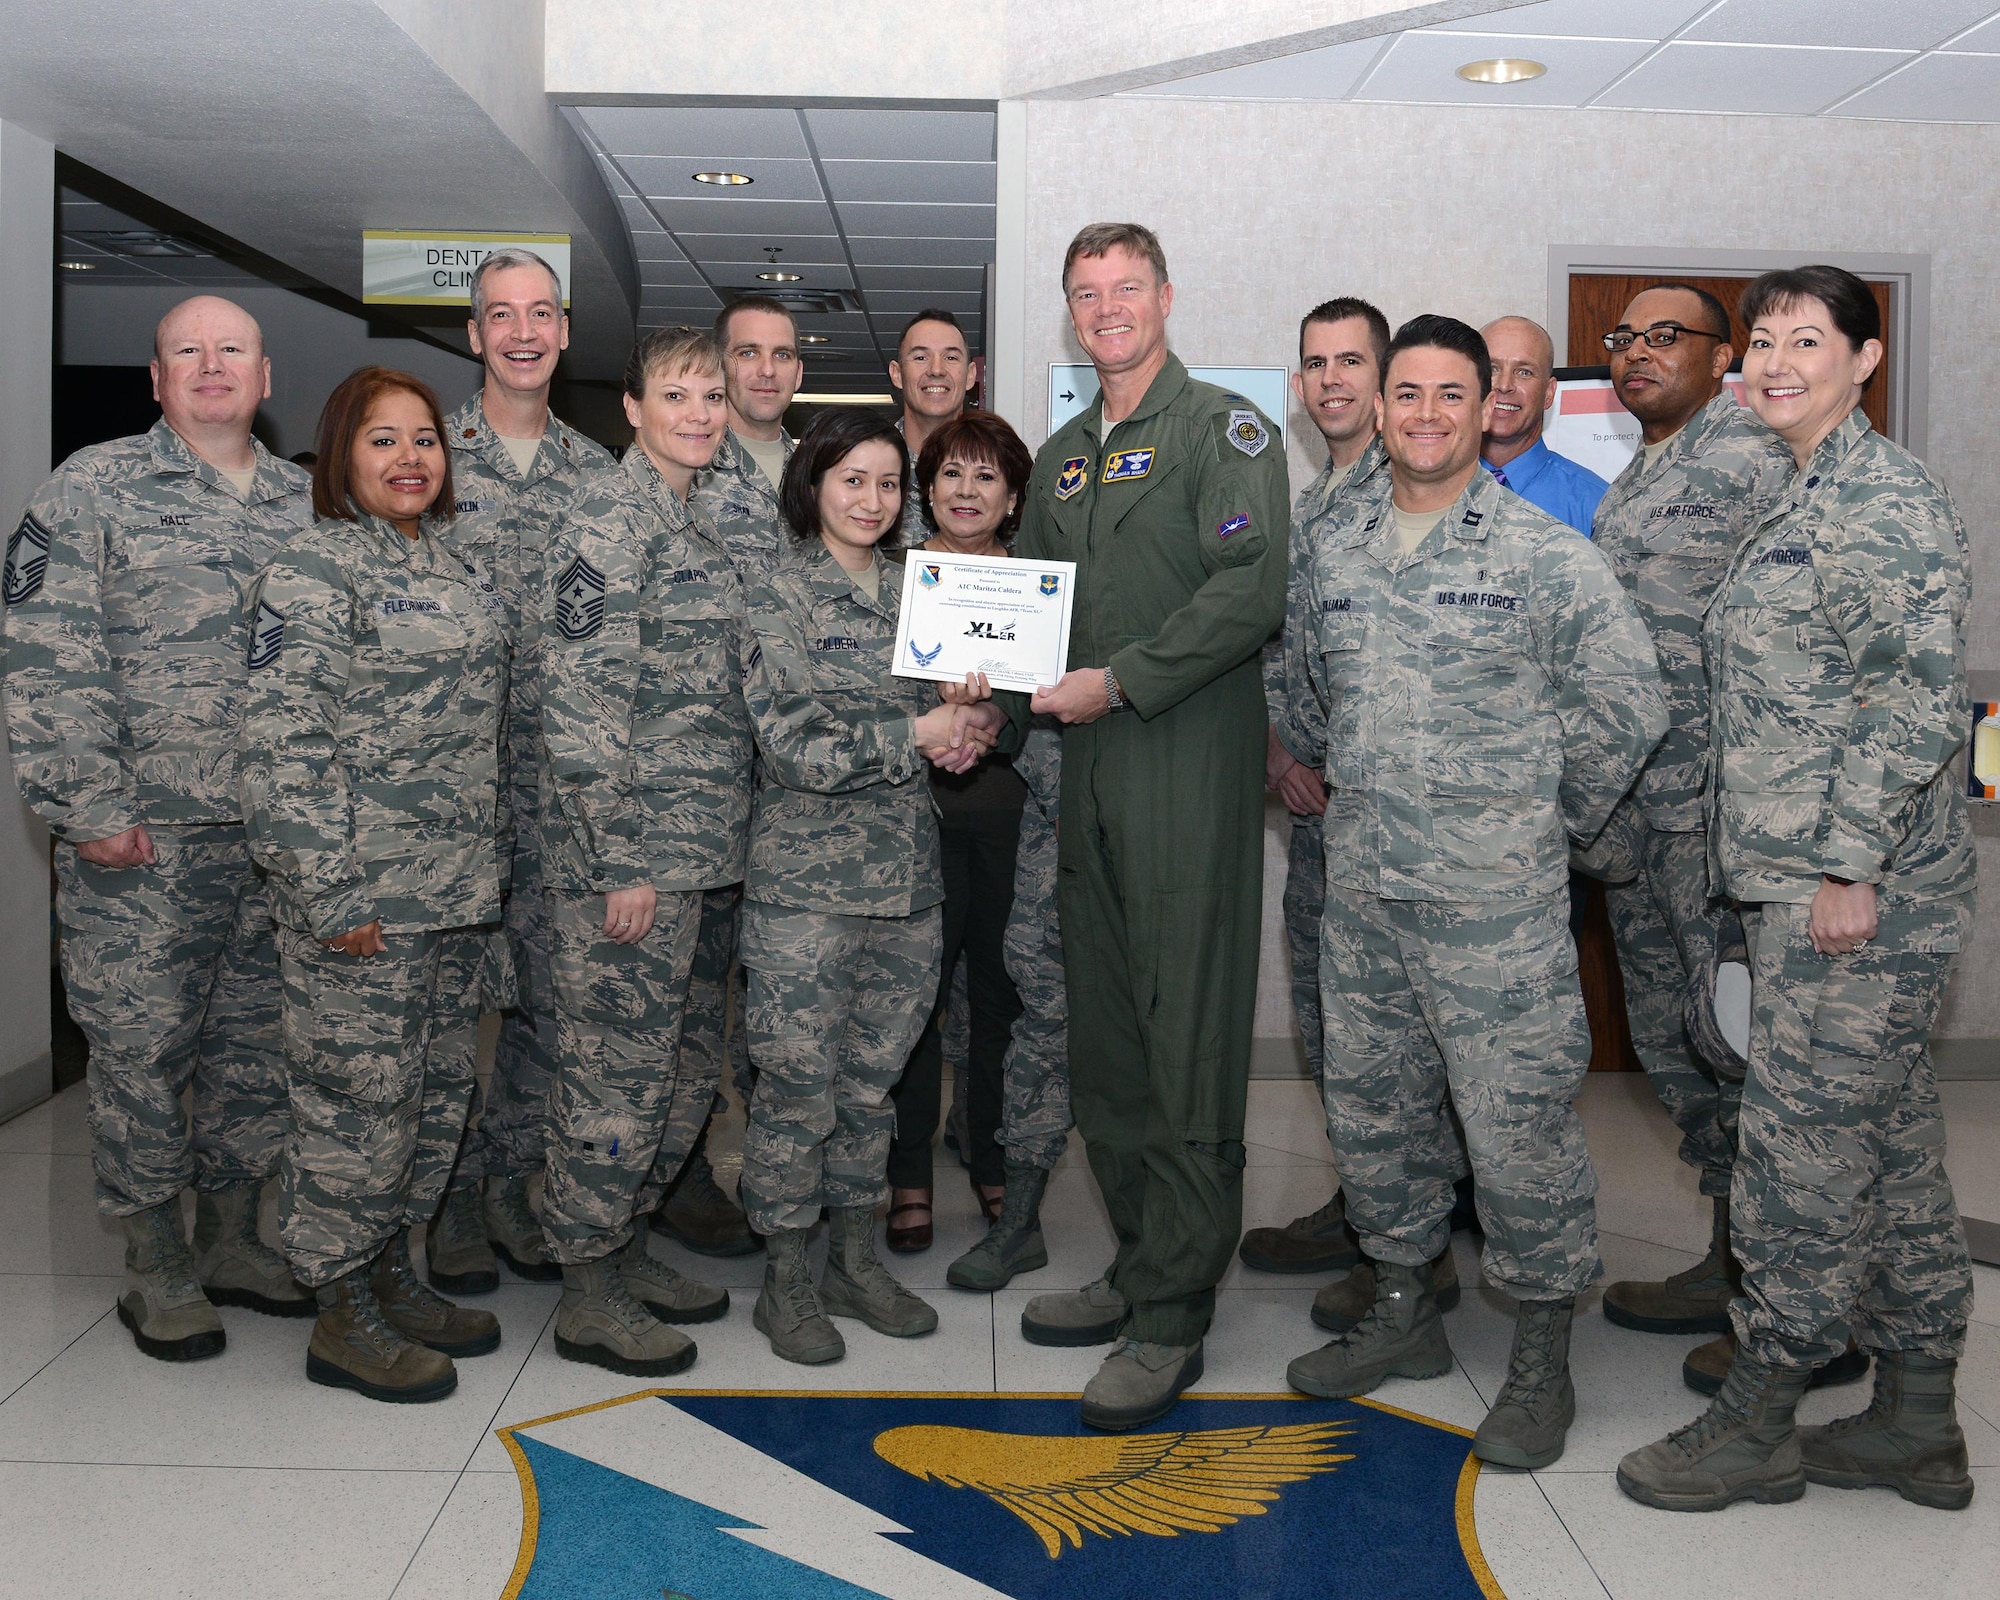 Airman 1st Class Maritza Caldera, center, 47th Medical Operations Squadron mental health technician, accepts the “XLer of the Week” award from Col. Thomas Shank, right, 47th Flying Training Wing commander, and Chief Master Sgt. Teresa Clapper, left, 47th FTW command chief, here, Feb. 17, 2016. The XLer is a weekly award chosen by wing leadership and is presented to those who consistently make outstanding contributions to their unit and Laughlin. (U.S. Air Force photo by Senior Airman Jimmie D. Pike)